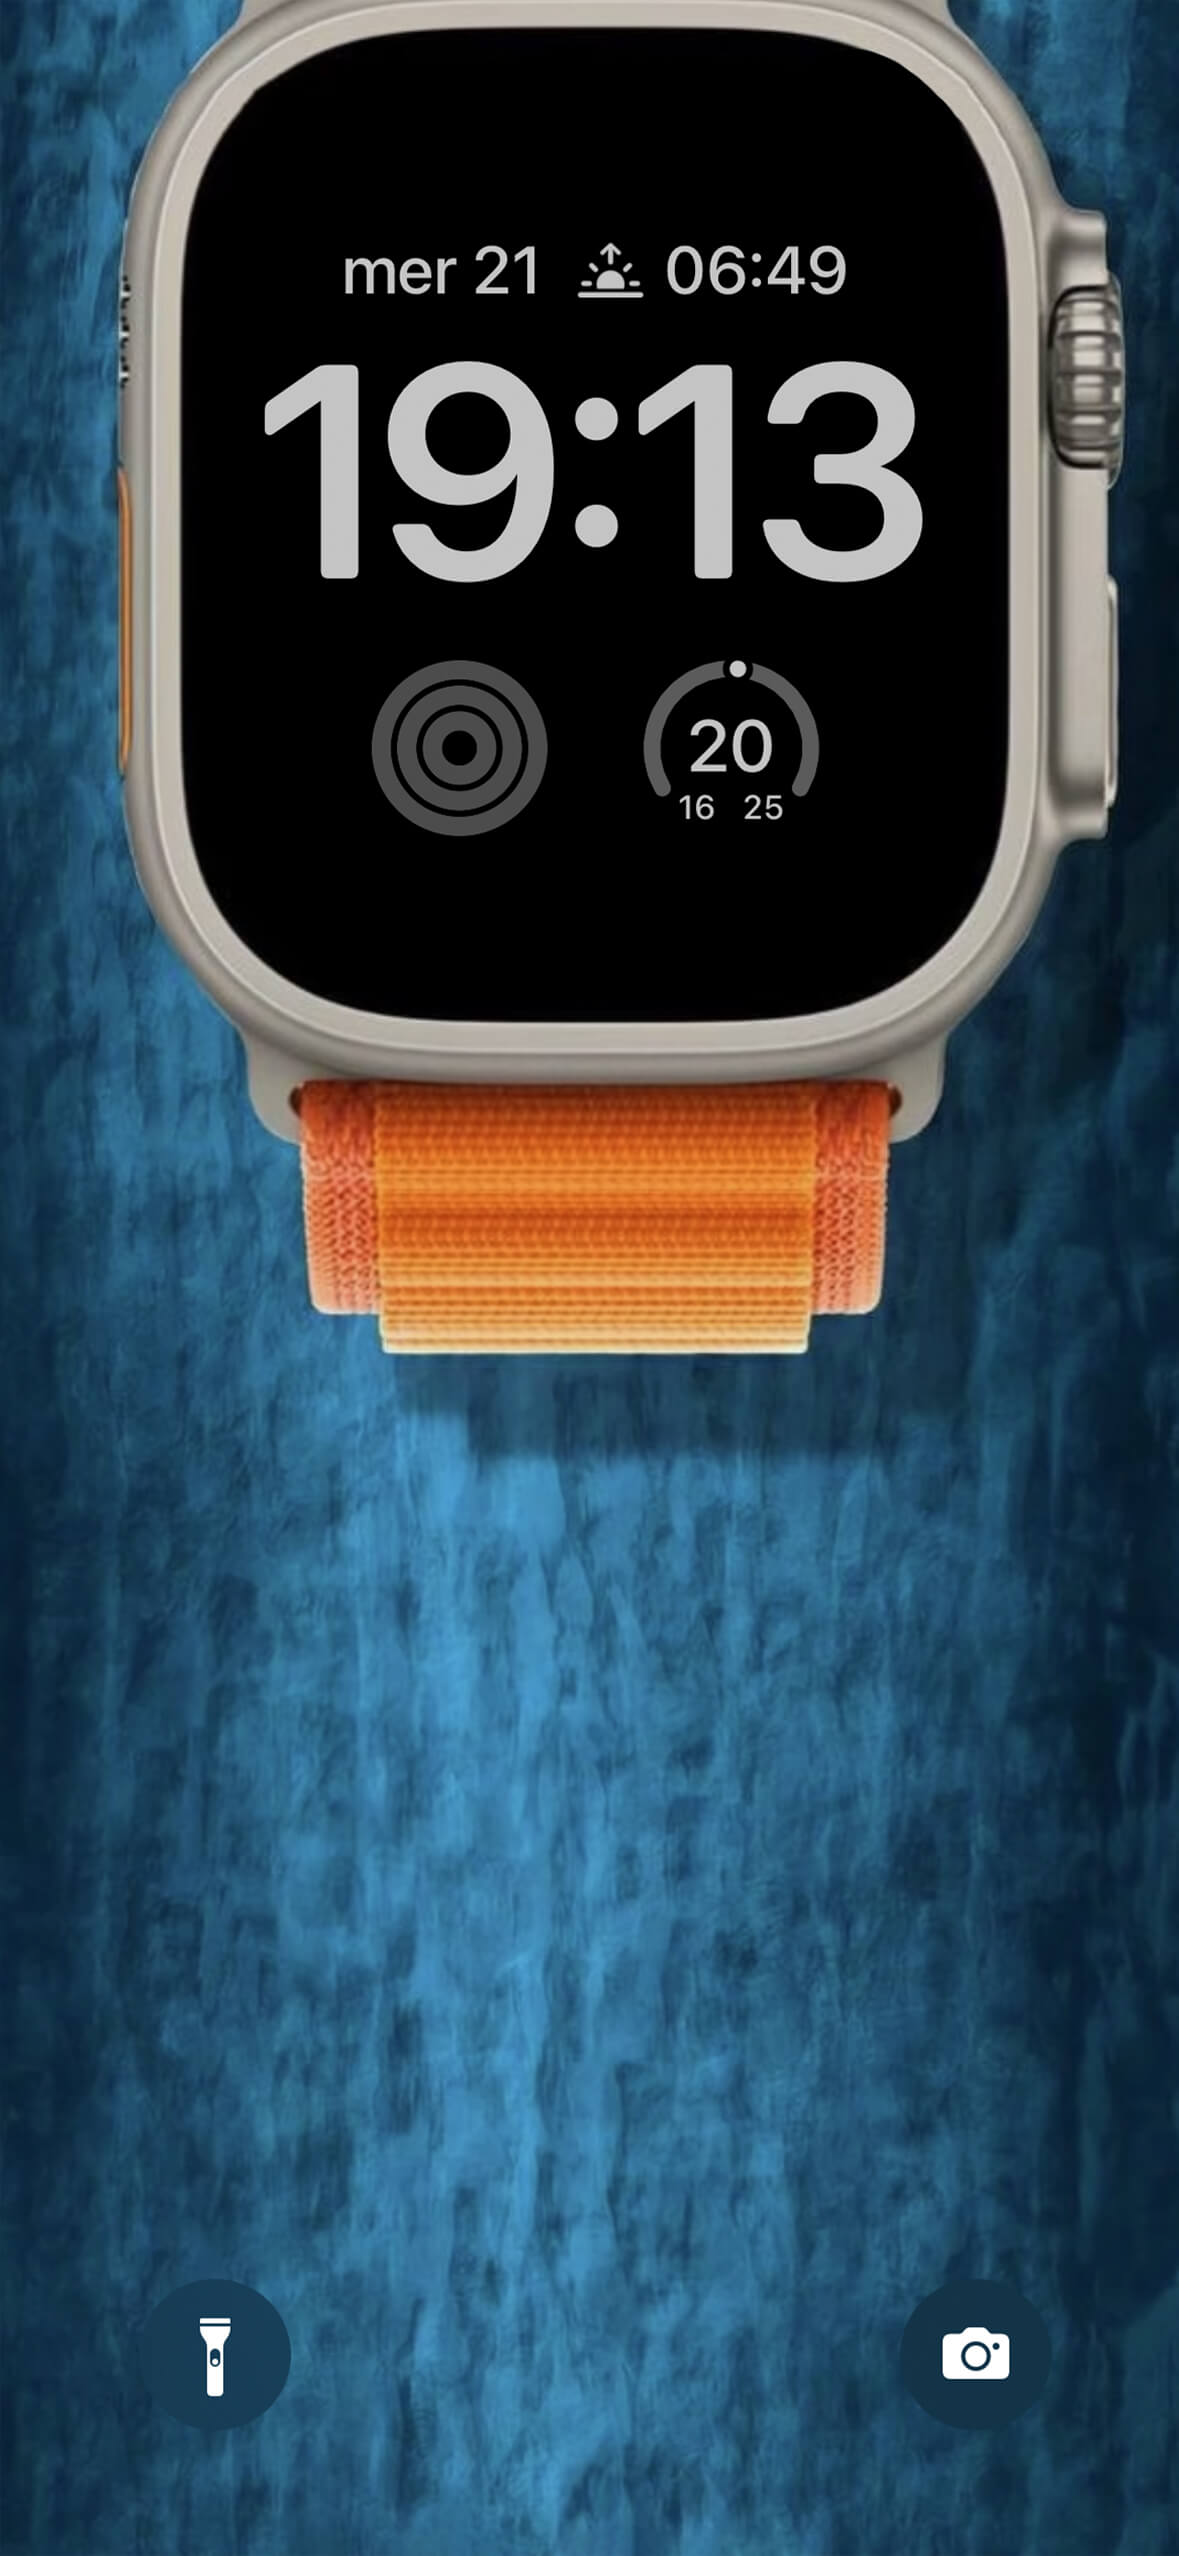 Apple Watch ULTRA wallpaper for iPhone - Wallpapers Central